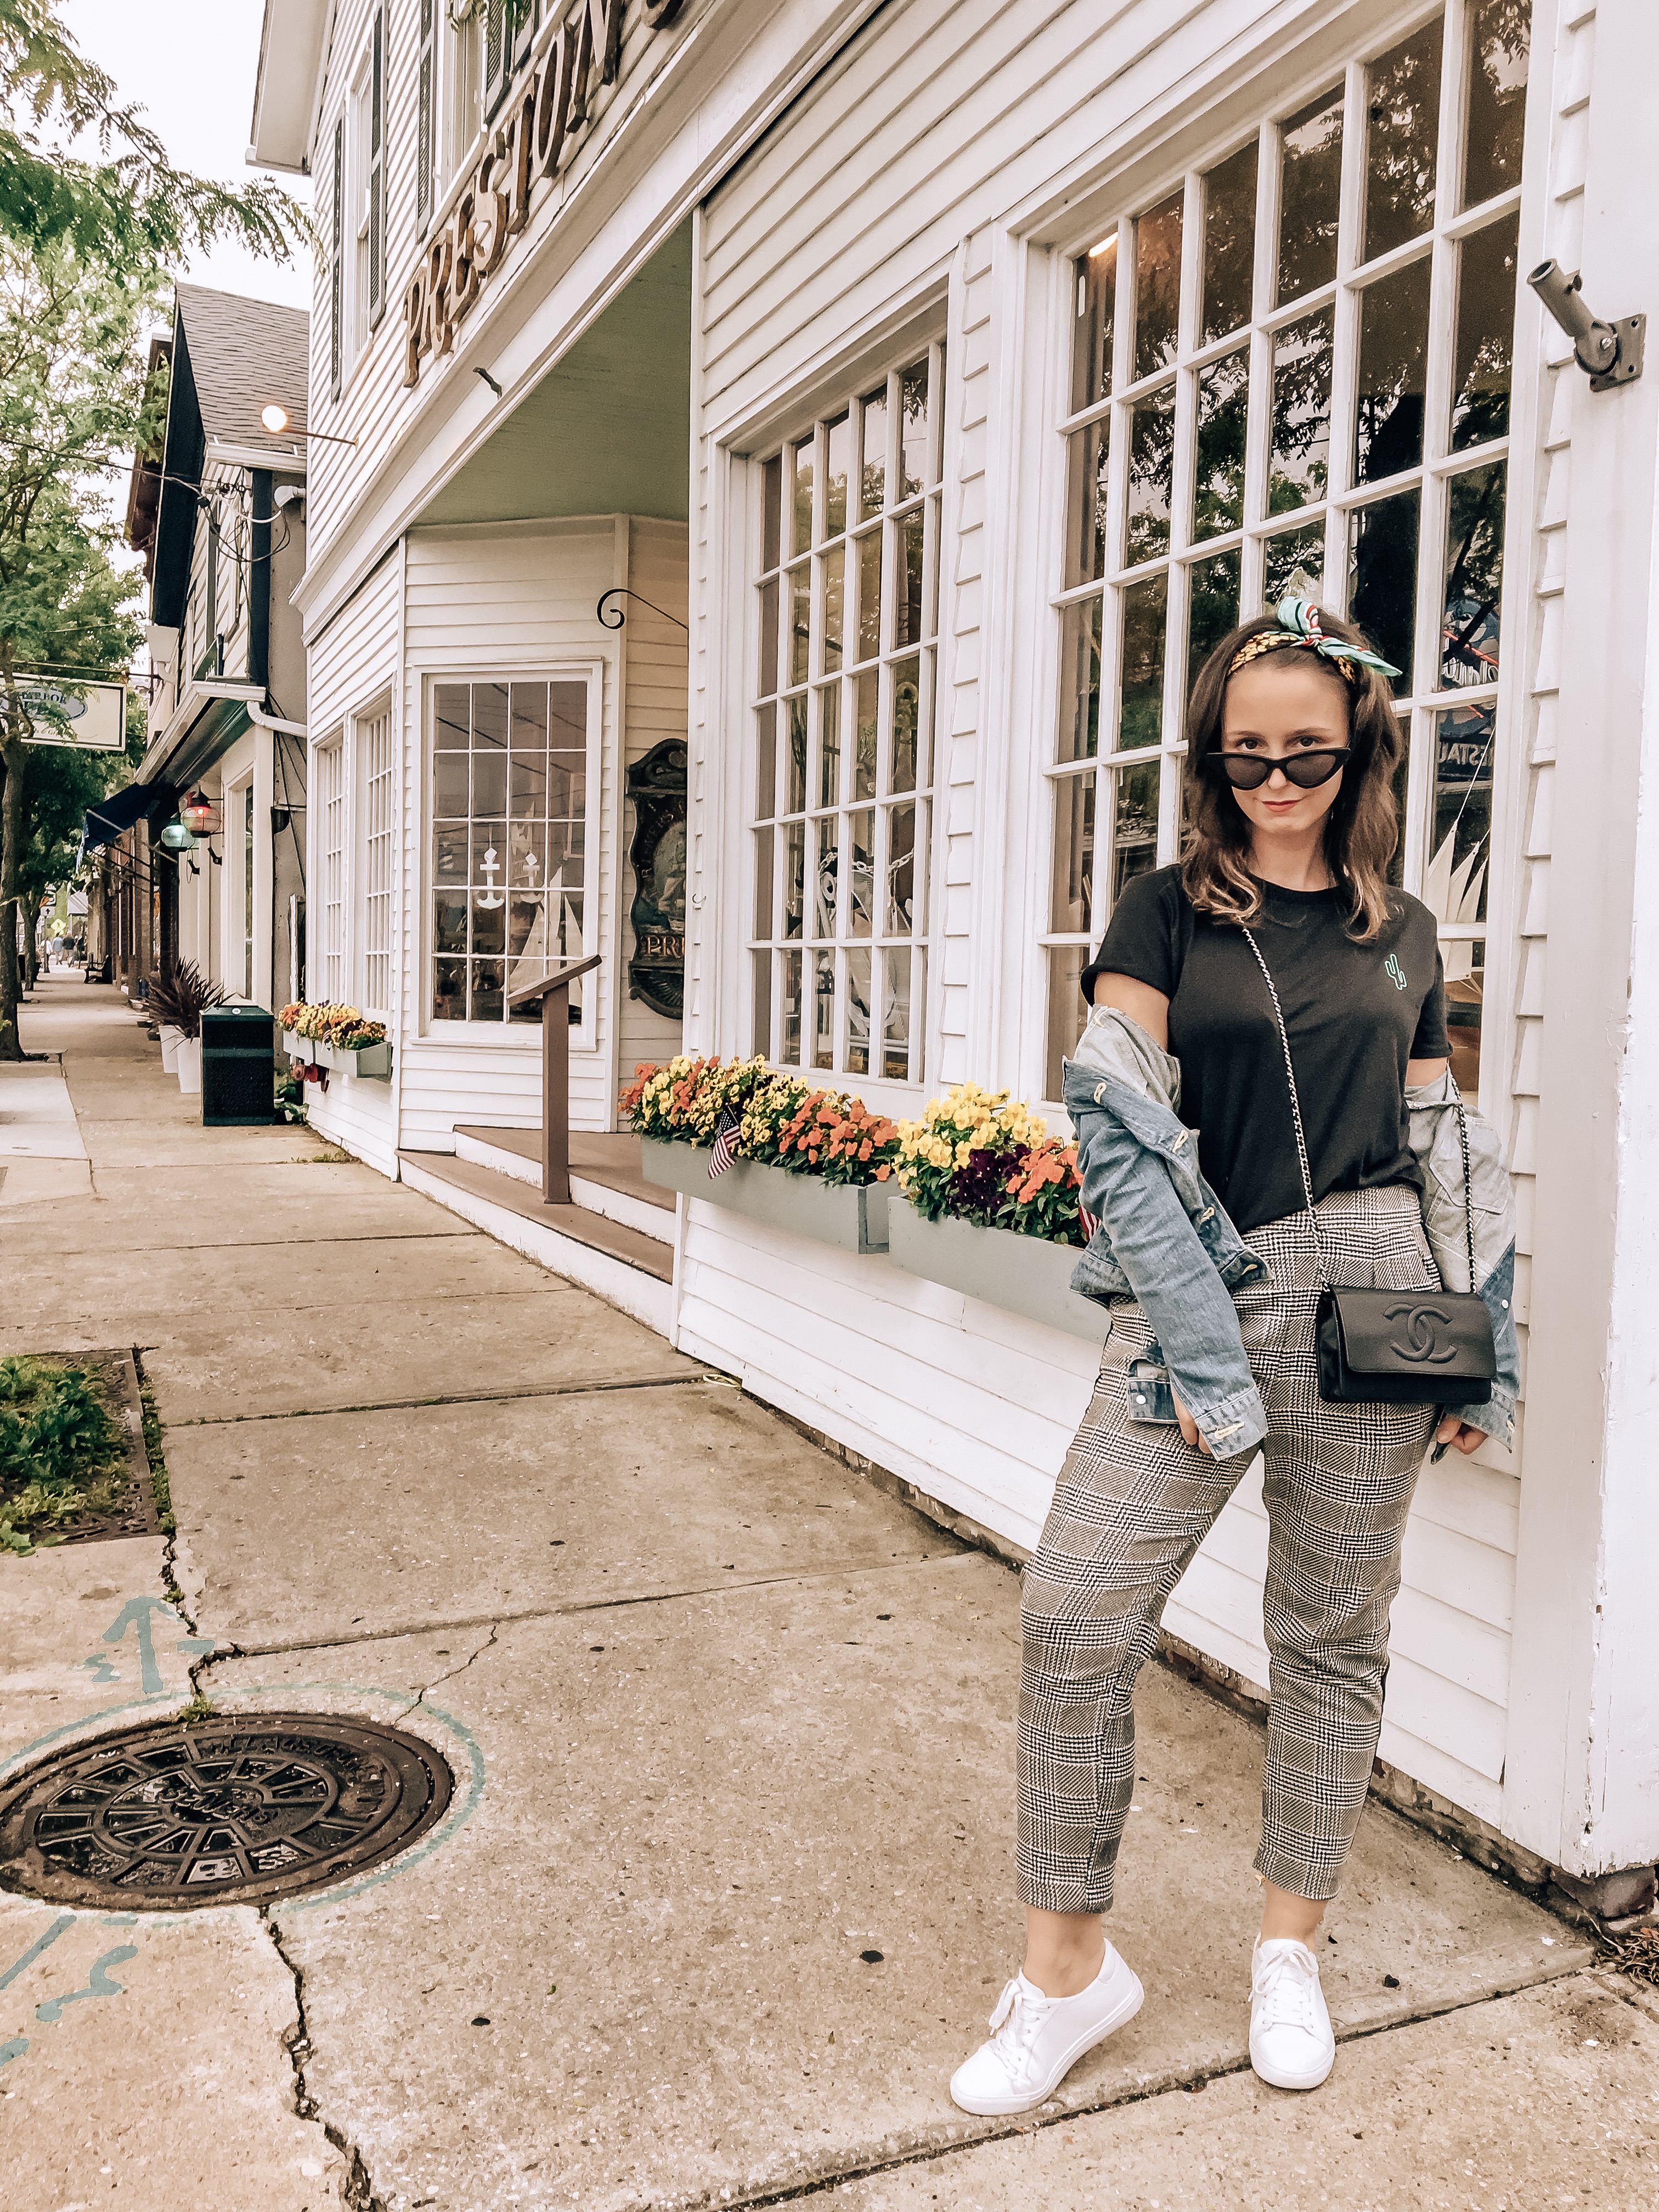 SIX A - Top 10 Things To Do On The North Fork This Summer - An Evening in Greenport New York - North Fork - Vacation - Travel #northfork #travel #greenport #vacation #travel #travelblog #summervacation #review #outfit #summerstyle #fallstyle